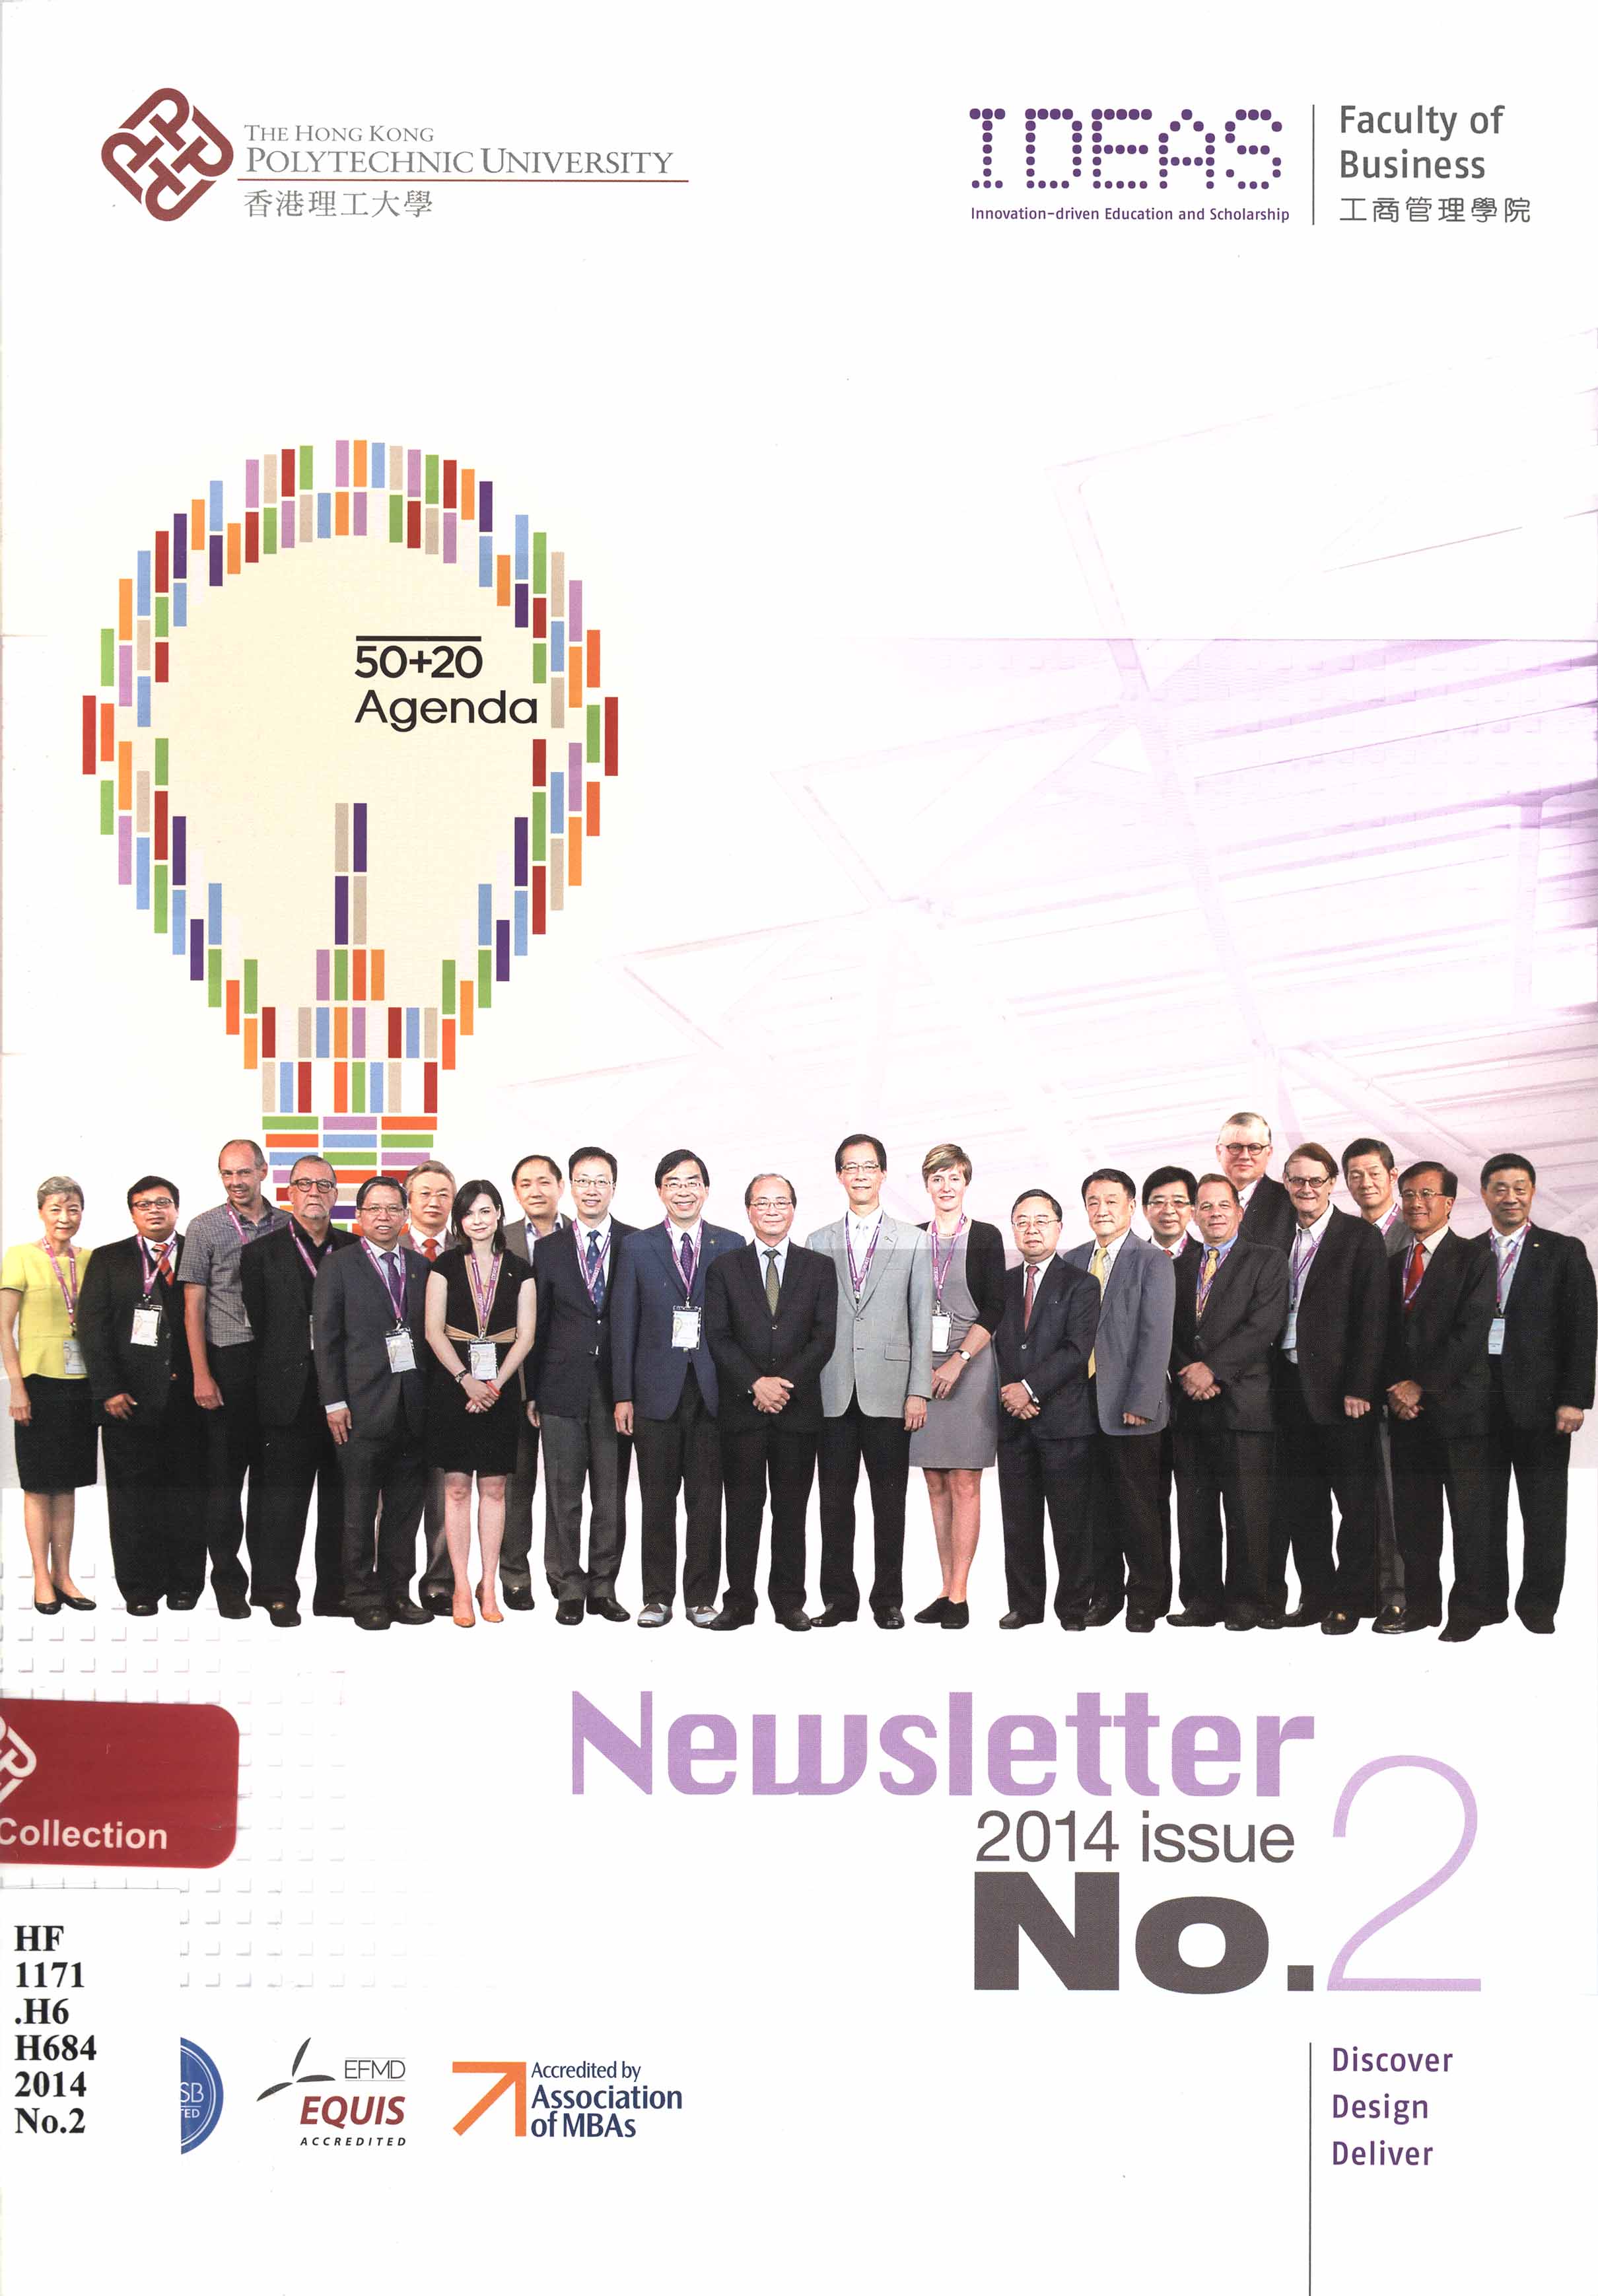 Faculty of Business newsletter. No.2, 2014